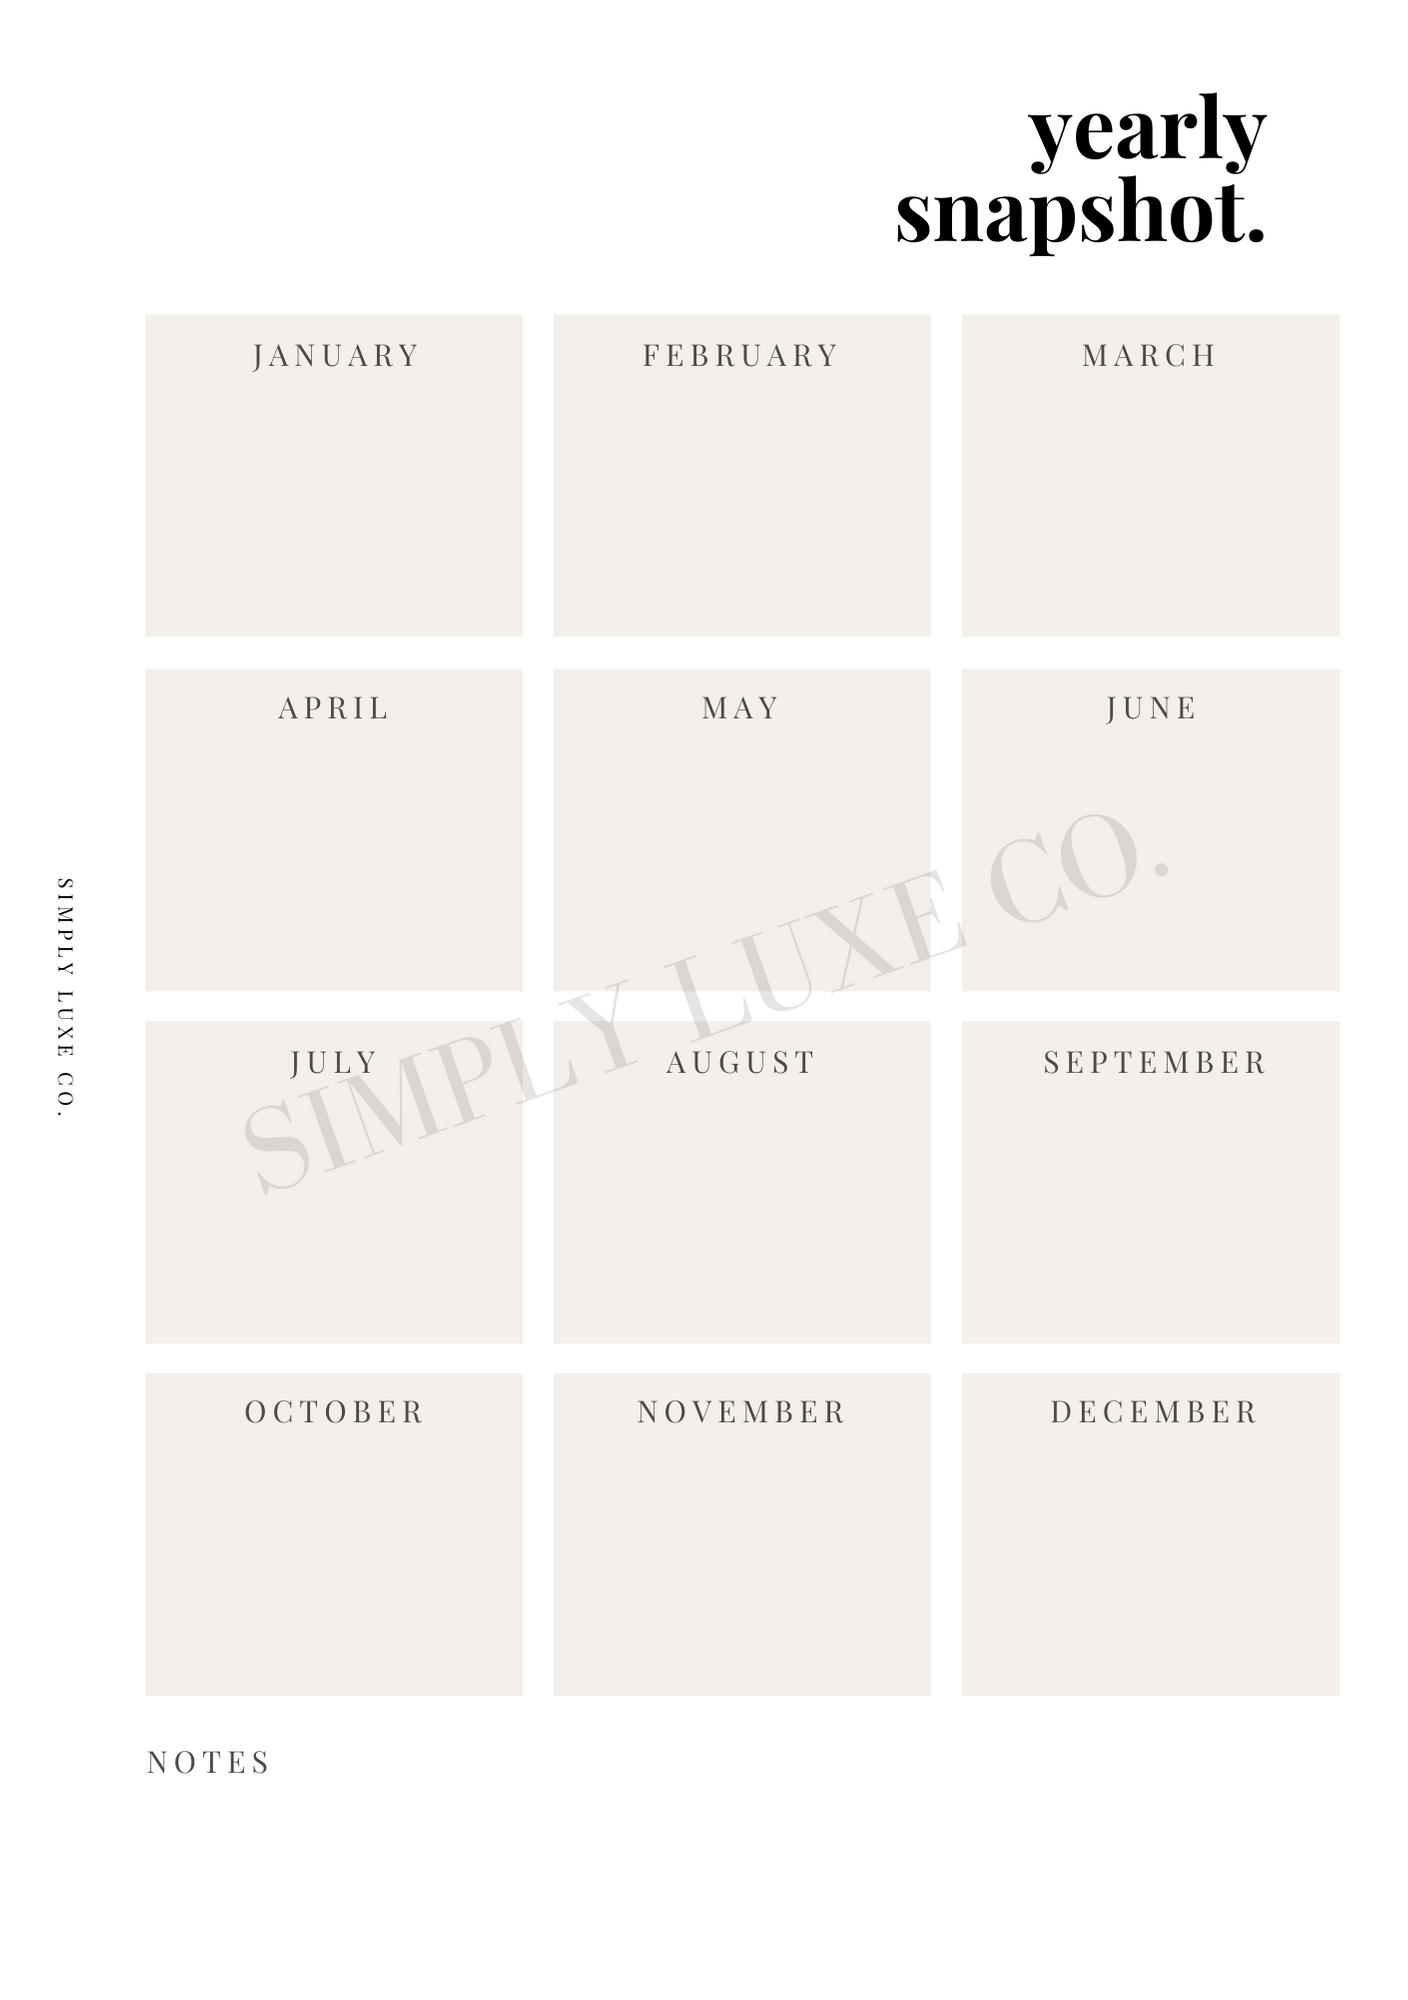 Yearly Snapshot Printable Inserts - Available in 2 colors